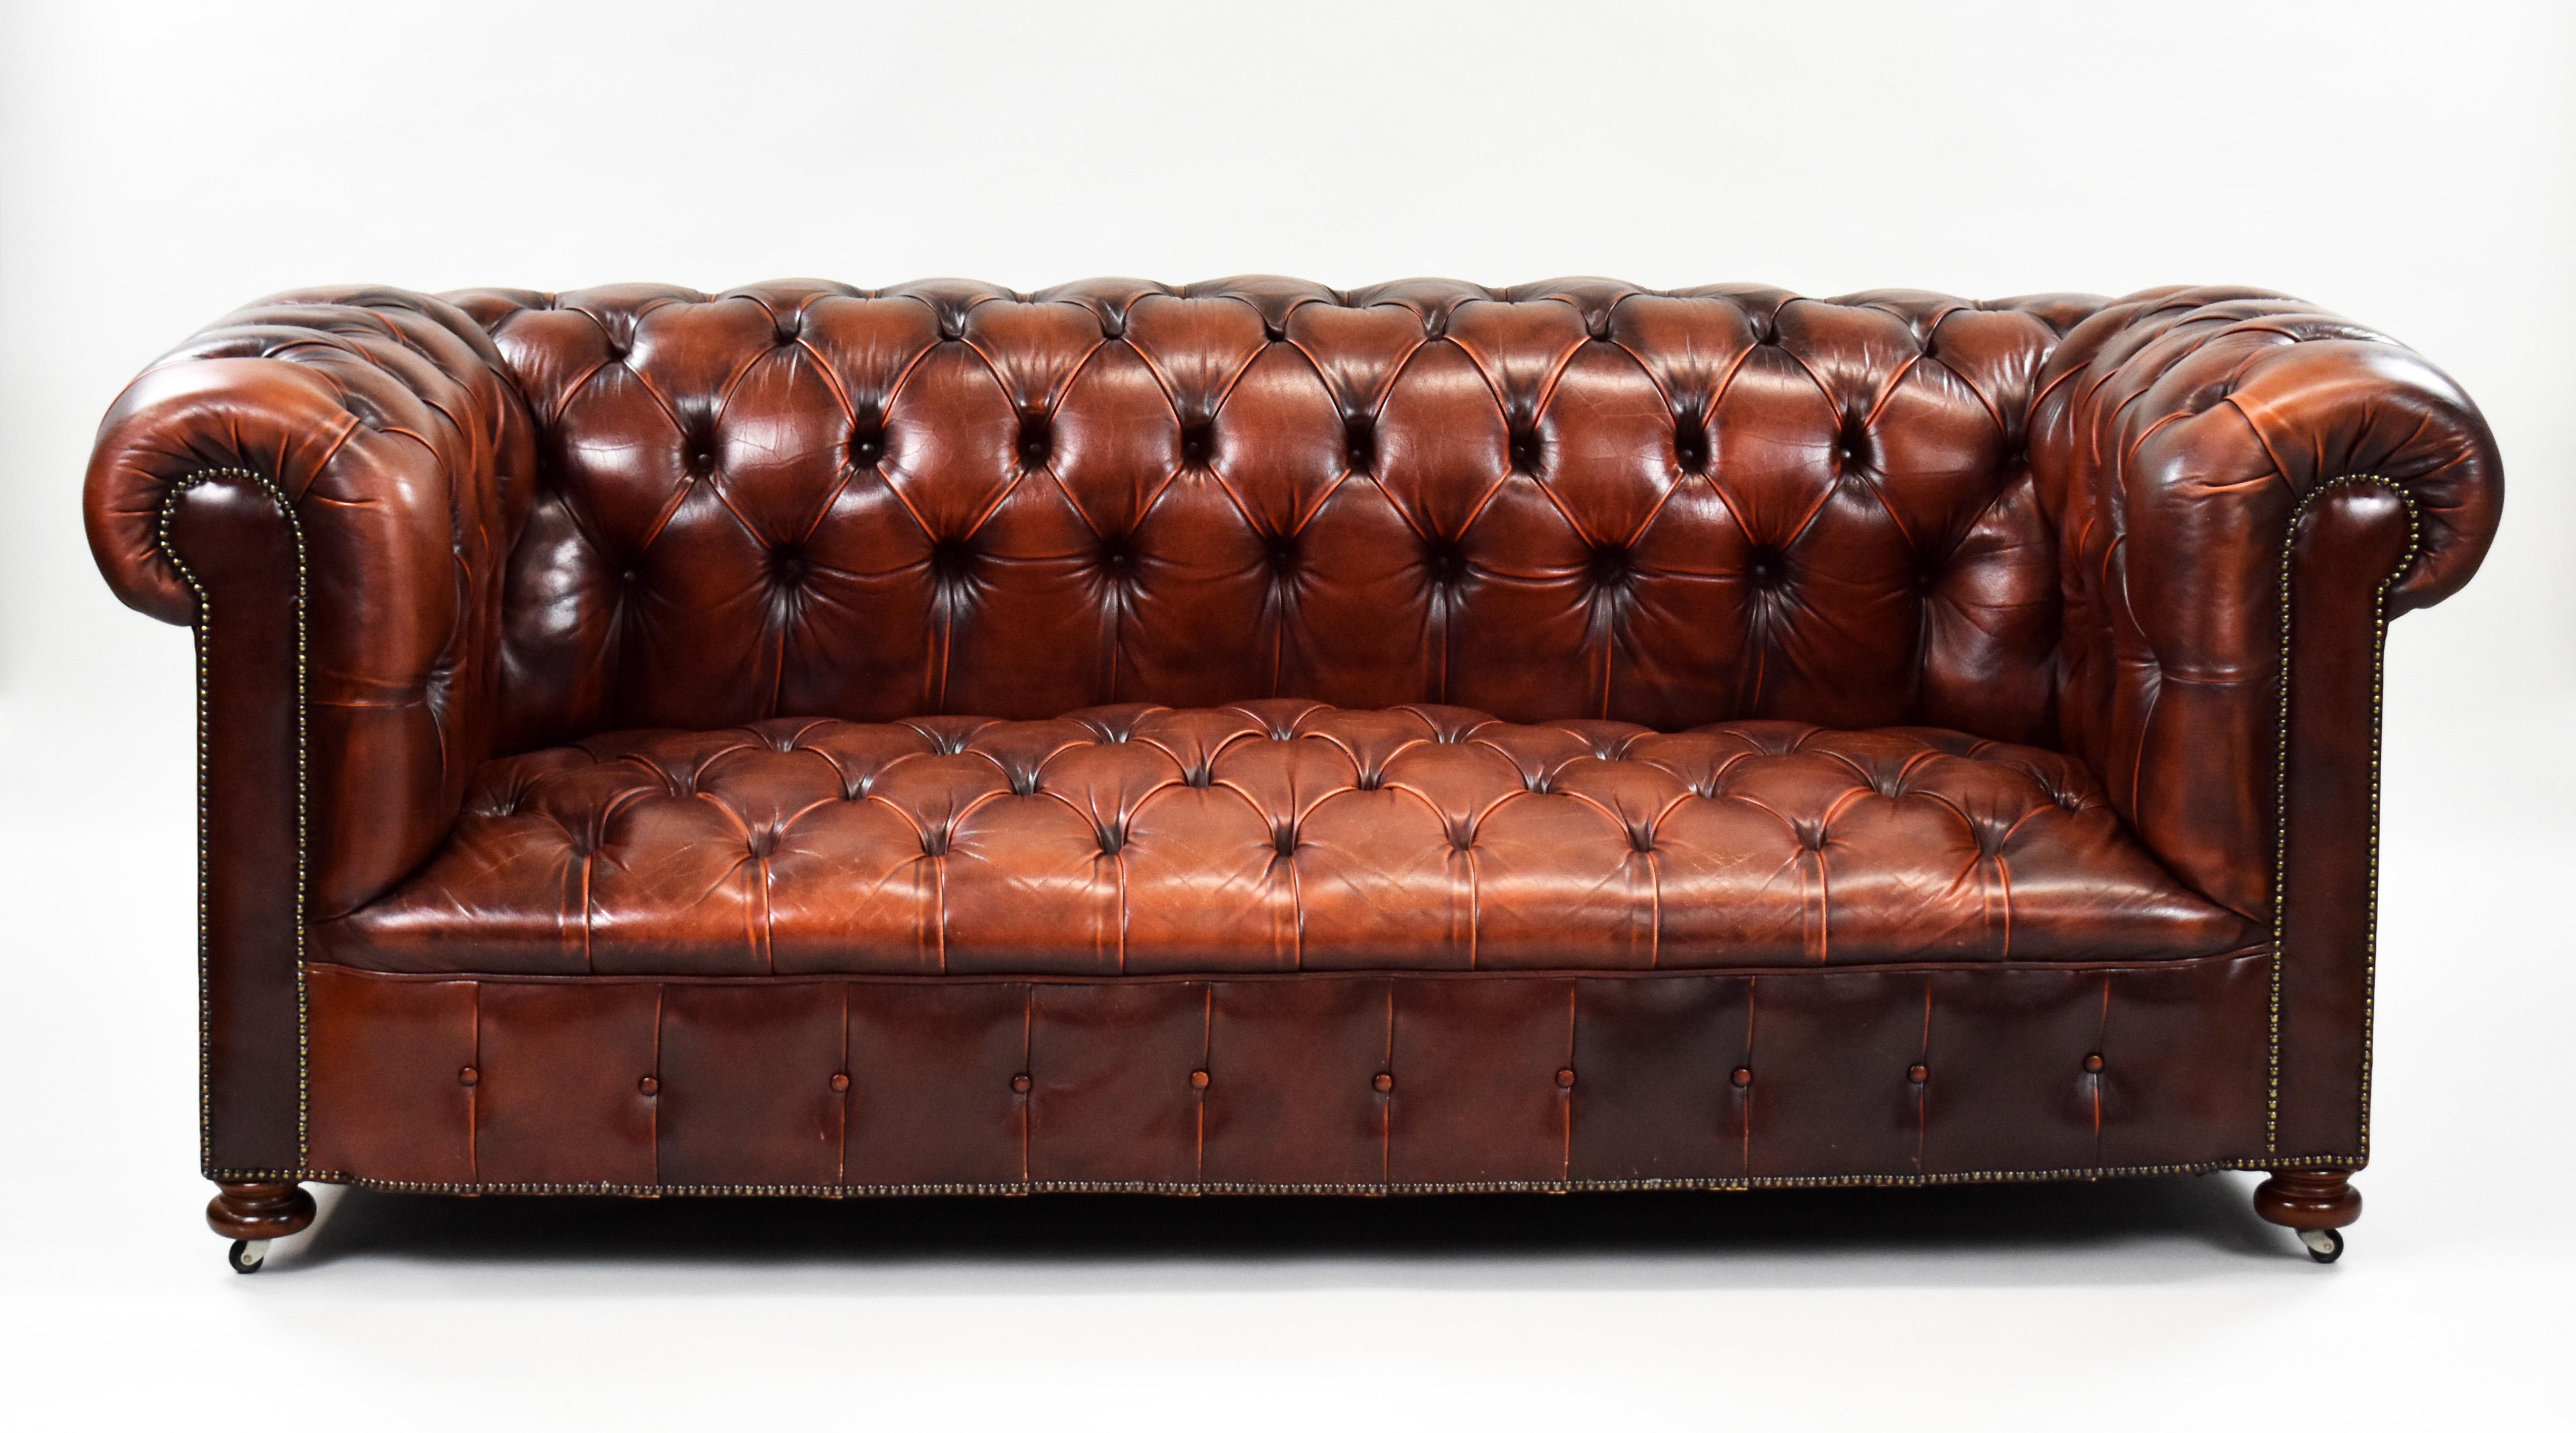 For sale is a good quality 1960's leather chesterfield suite comprising of a leather chesterfield sofa and two deep buttoned armchairs standing on claw and ball feet. All of the items in the suite remain in very good condition for their age.